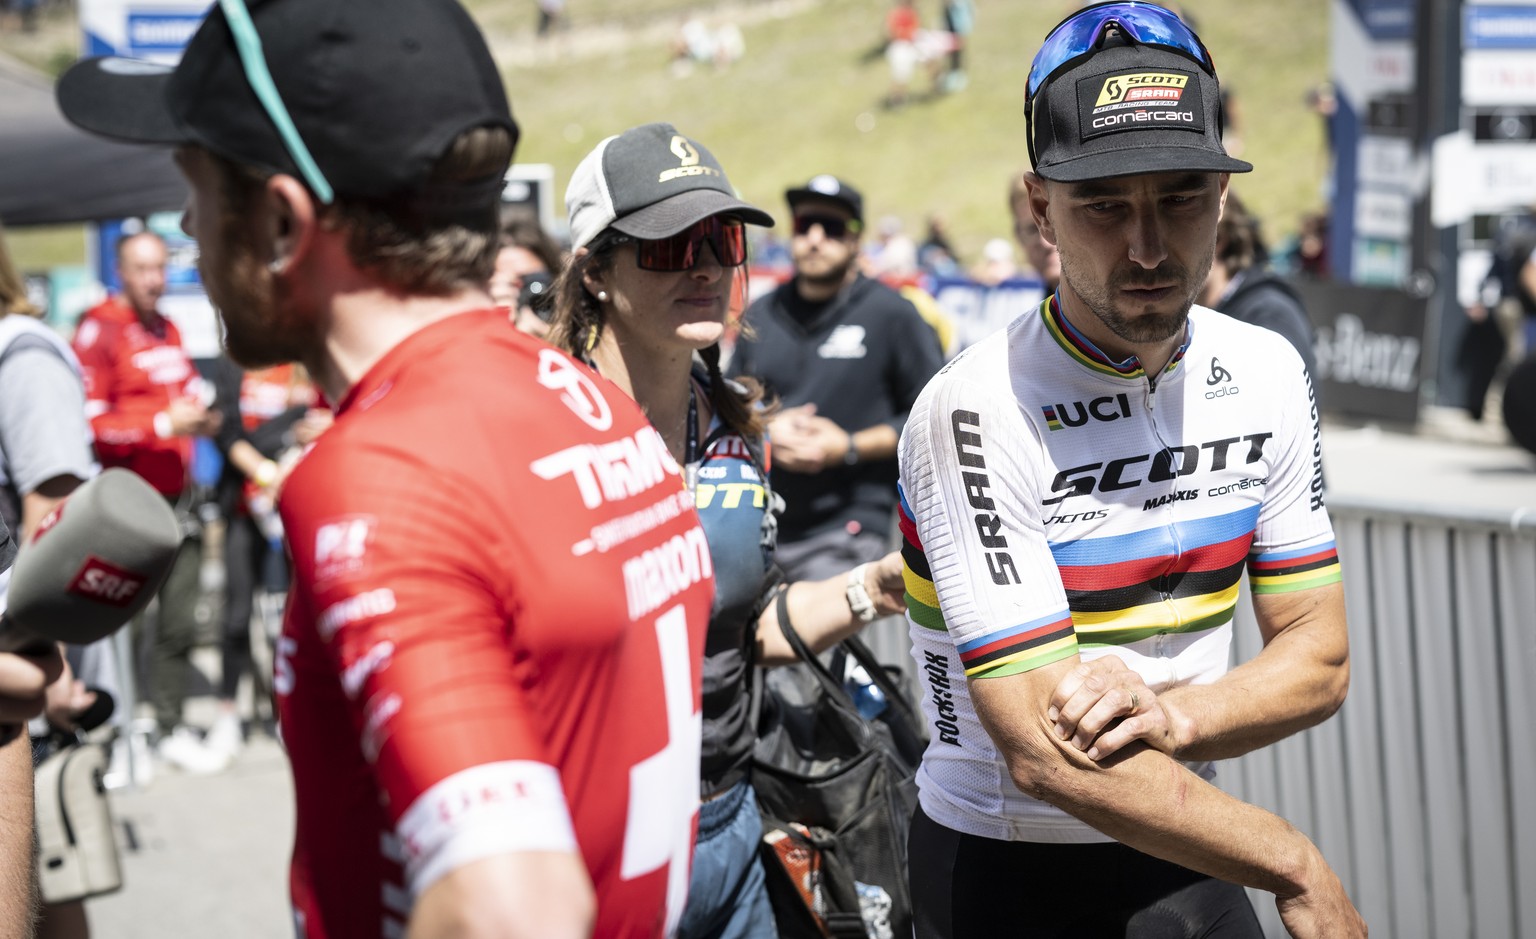 Nino Schurter, right, and Mathias Flueckiger of Switzerland react after crashing during the final lap at the UCI Cross Country Mountain Bike race, on Sunday, July 10, 2022, in Lenzerheide, Switzerland ...